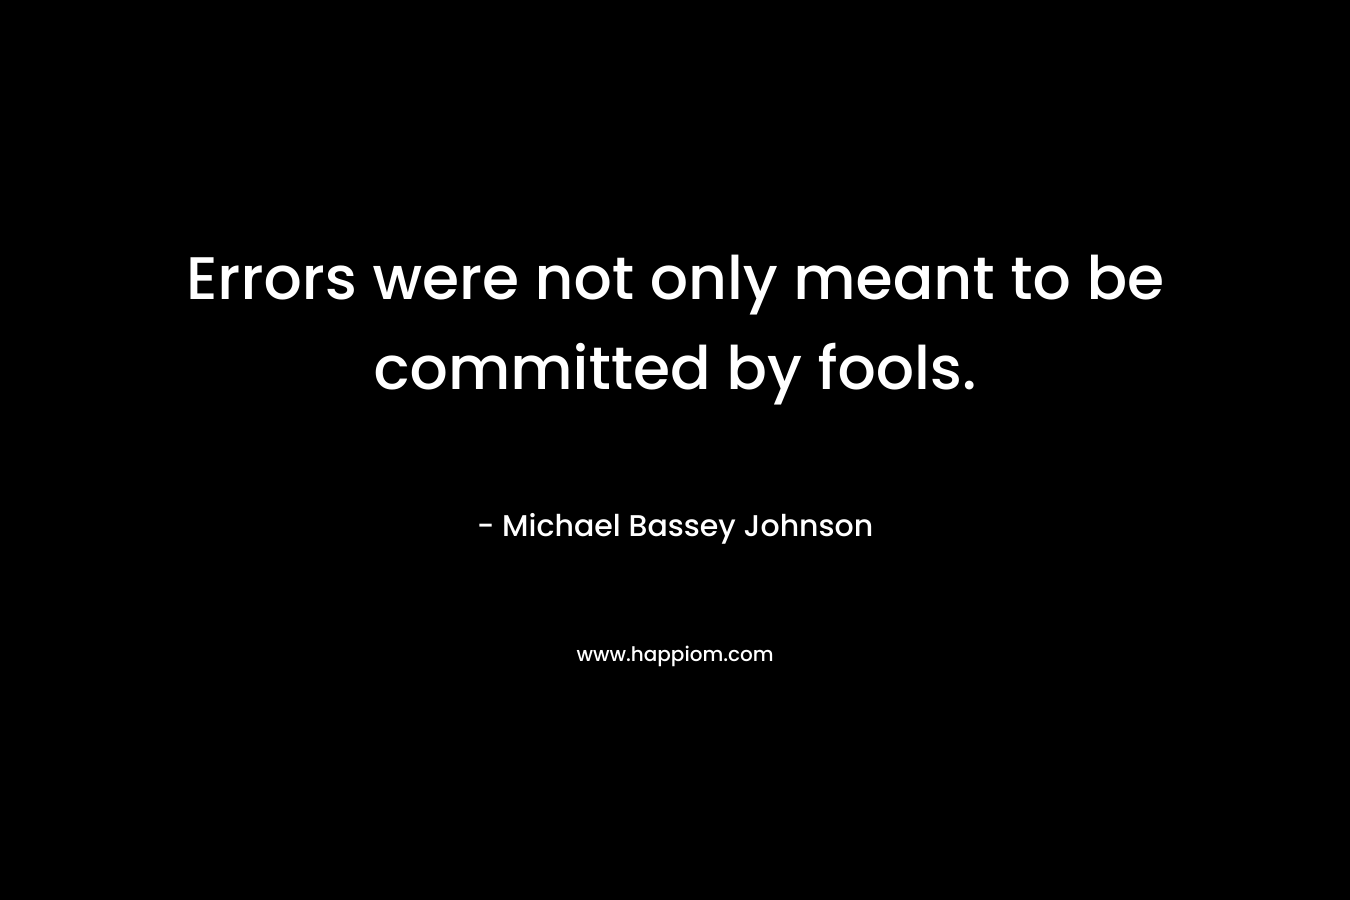 Errors were not only meant to be committed by fools. – Michael Bassey Johnson